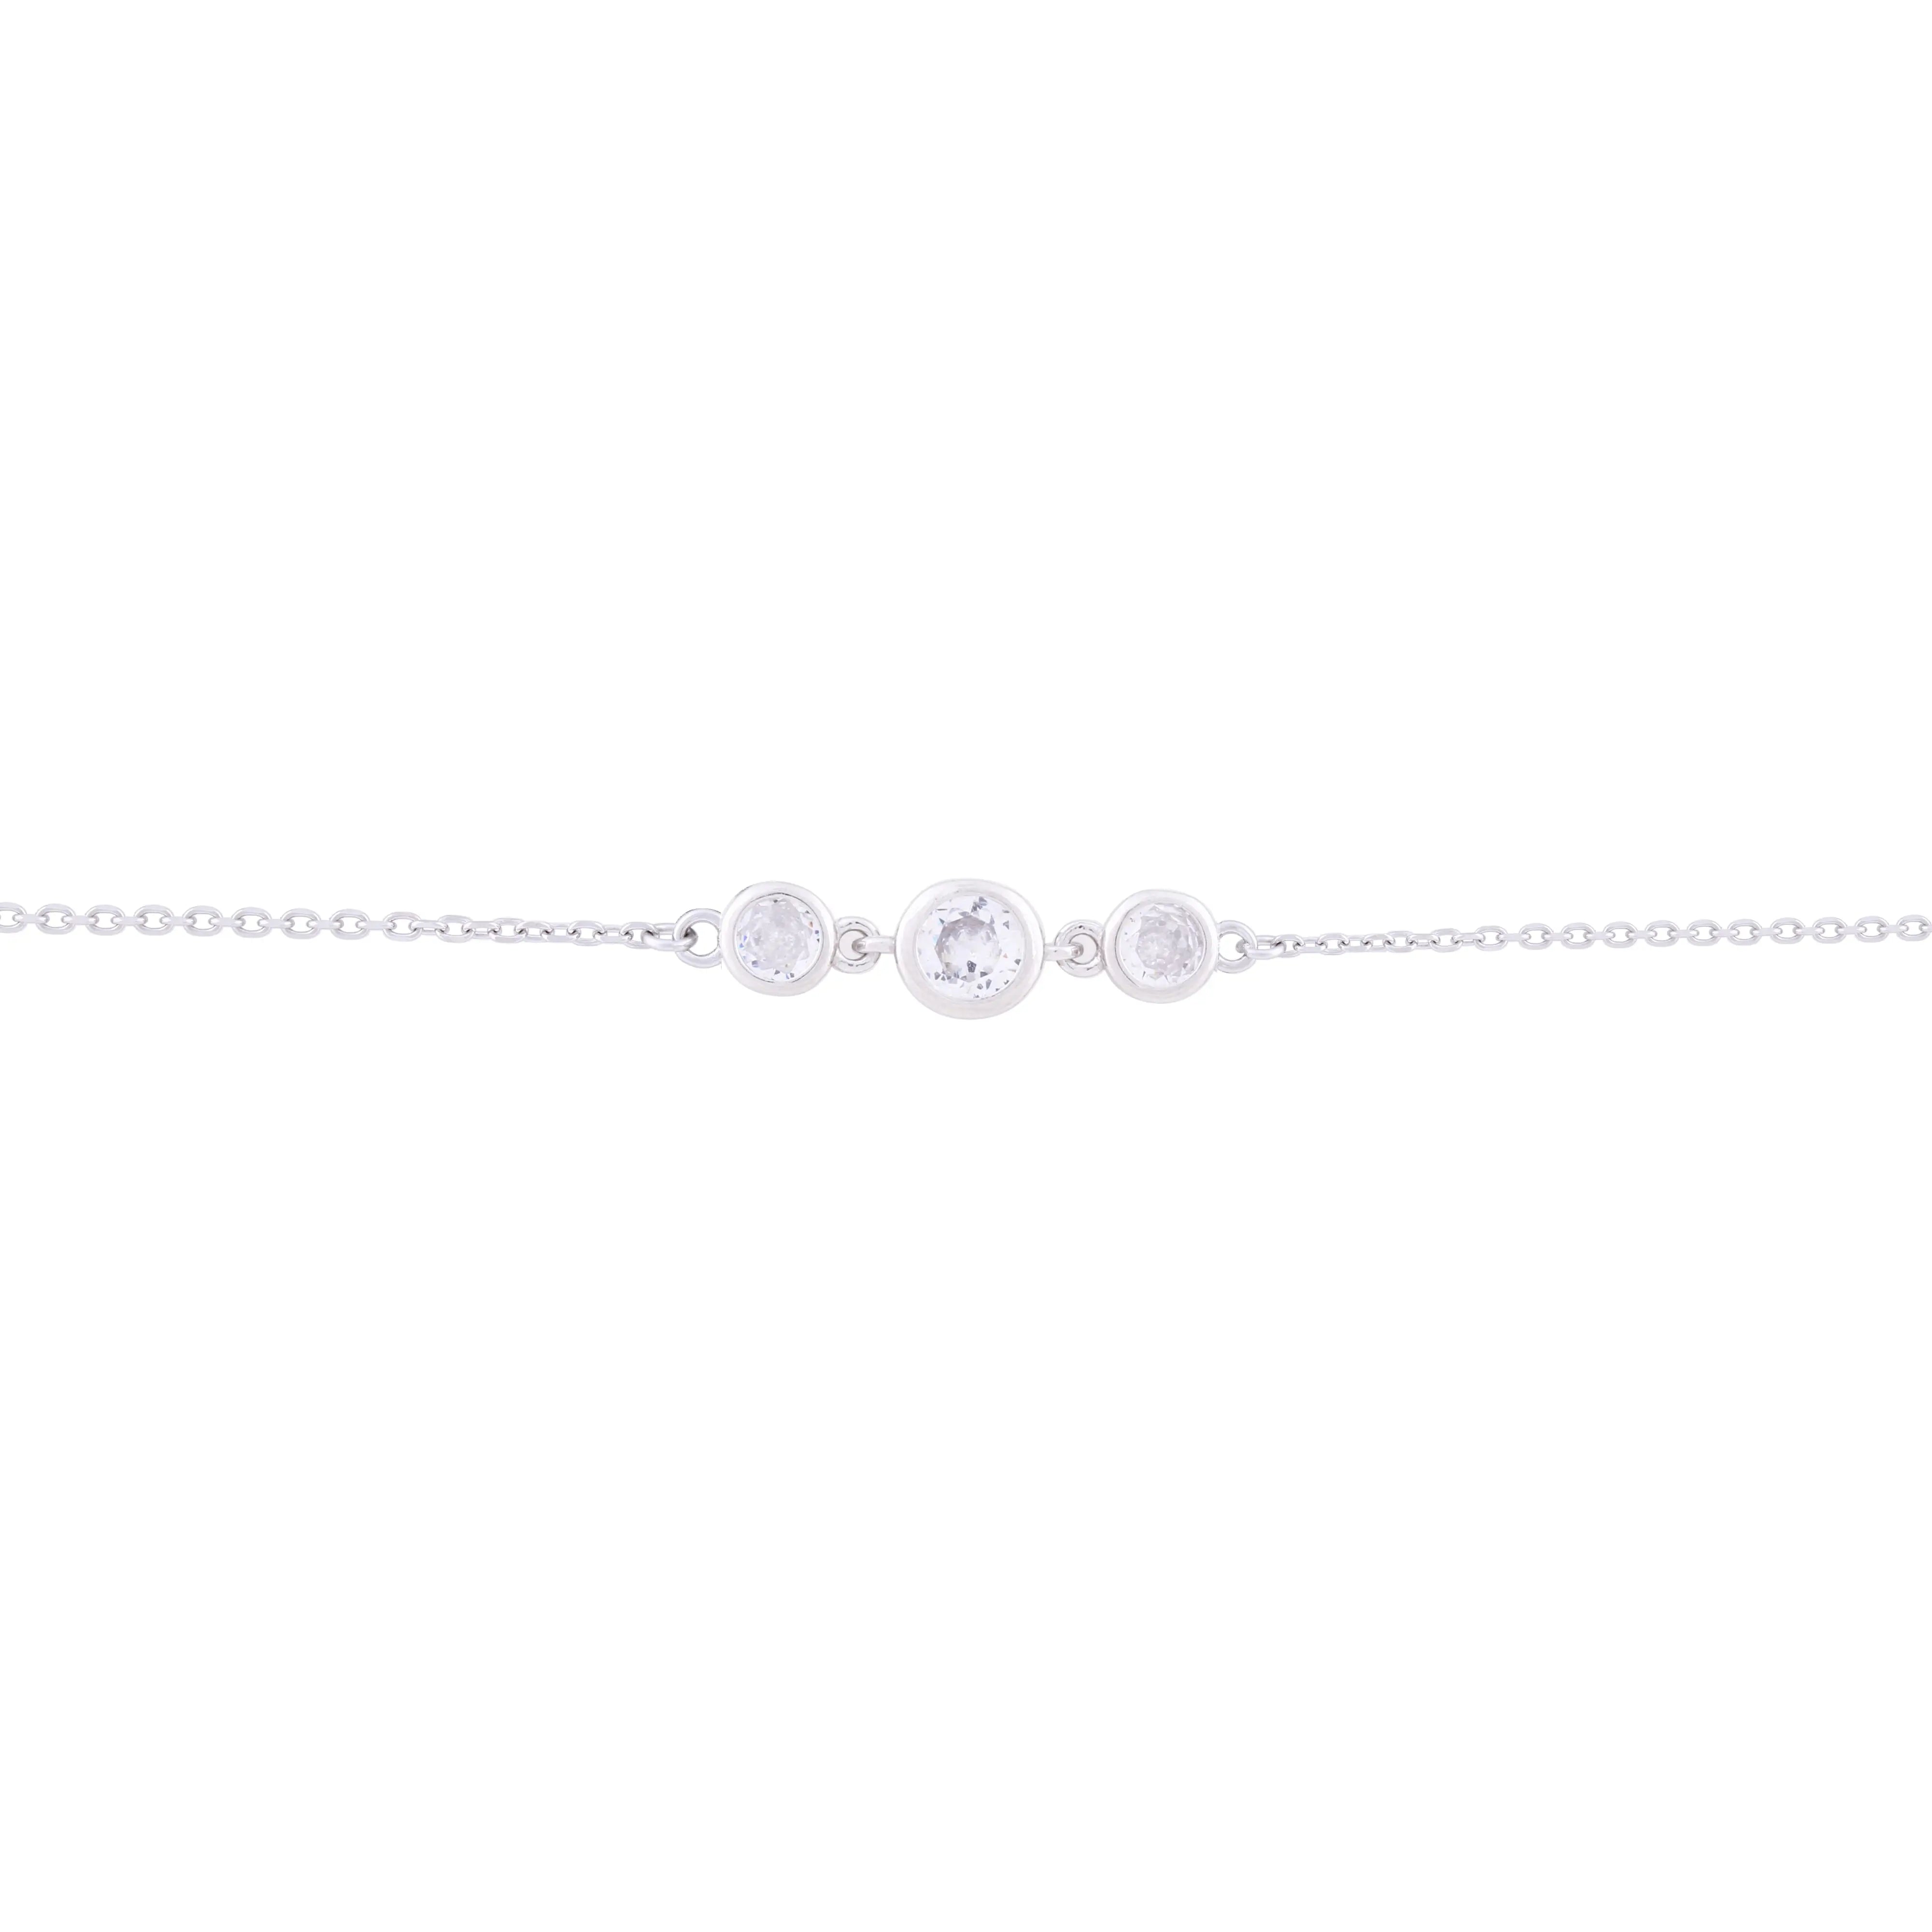 Asfour chain Bracelet With Round Stone In 925 Sterling Silver